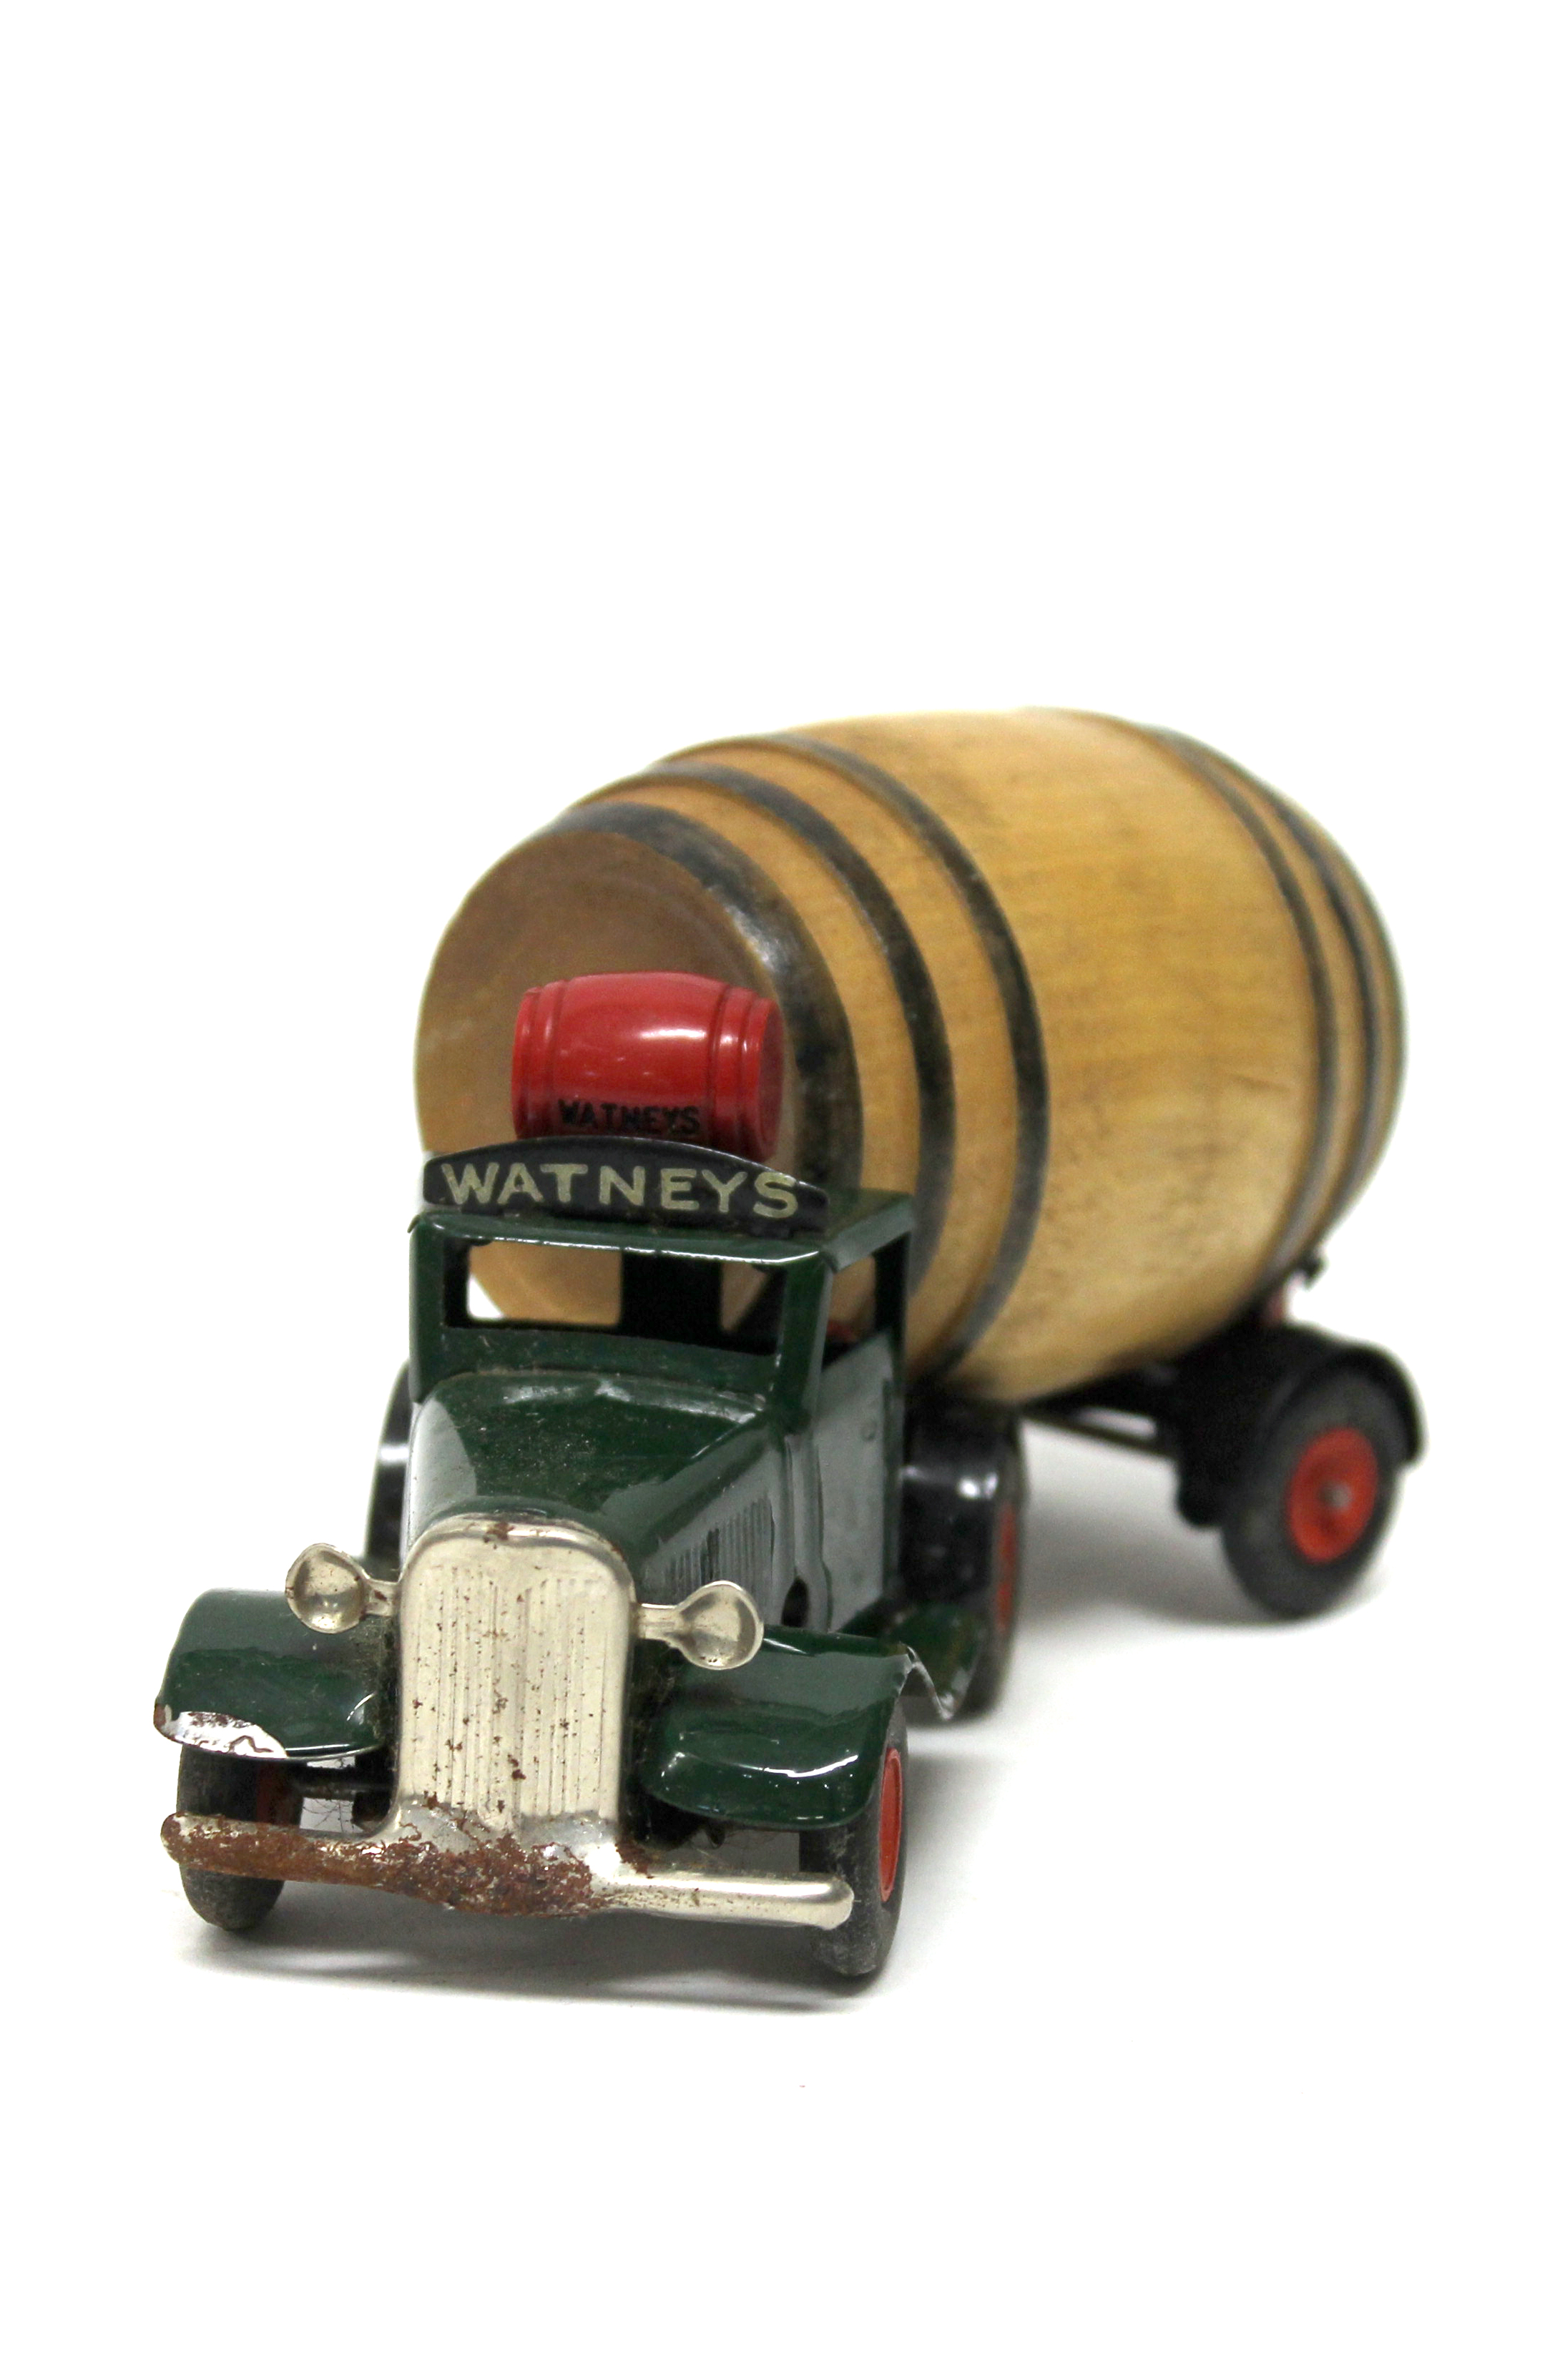 A Minic clockwork tin plate lorry, Watneys Ale, boxed. Illustrated.